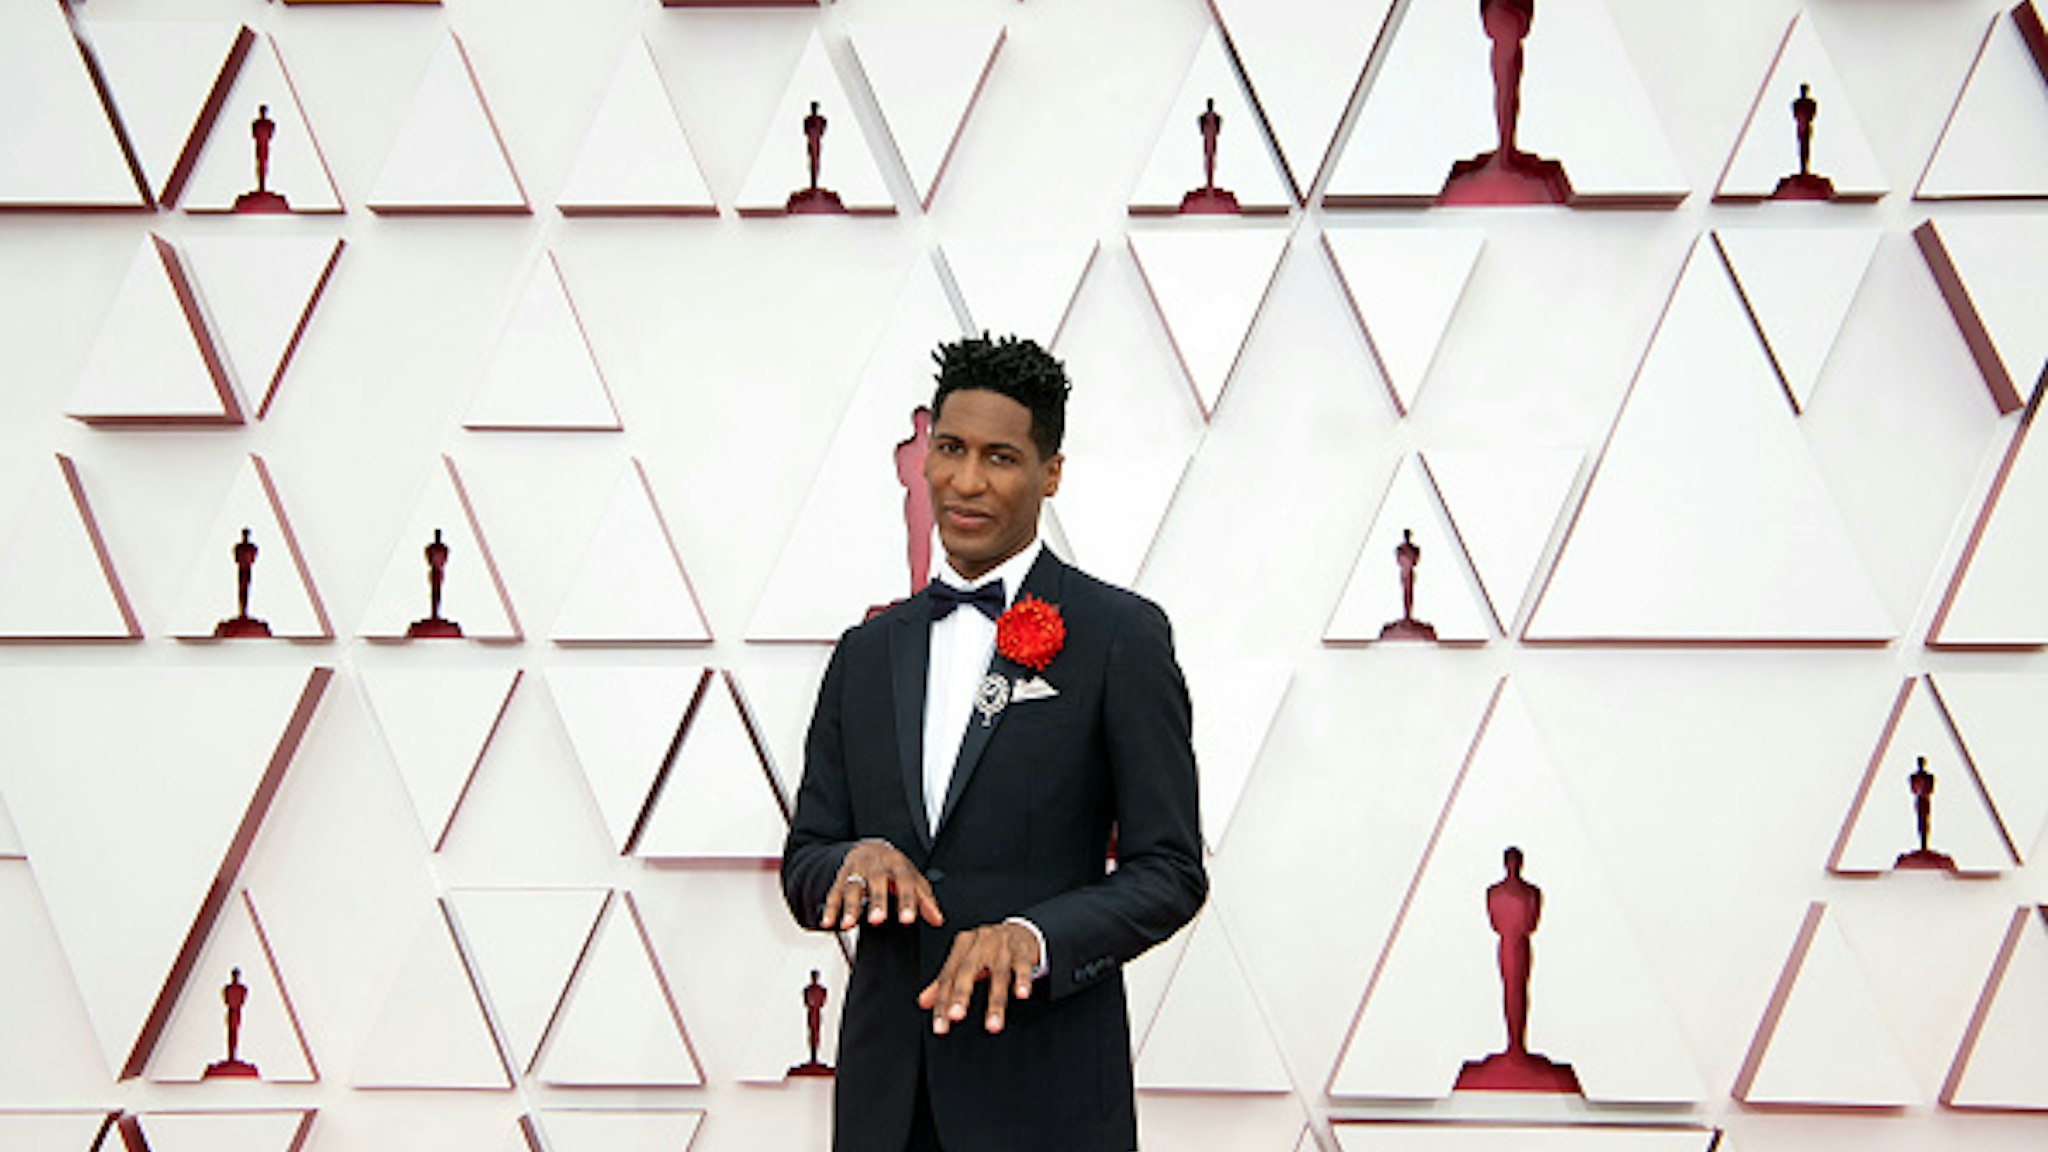 LOS ANGELES, CALIFORNIA – APRIL 25: (EDITORIAL USE ONLY) In this handout photo provided by A.M.P.A.S., Jon Batiste attends the 93rd Annual Academy Awards at Union Station on April 25, 2021 in Los Angeles, California.